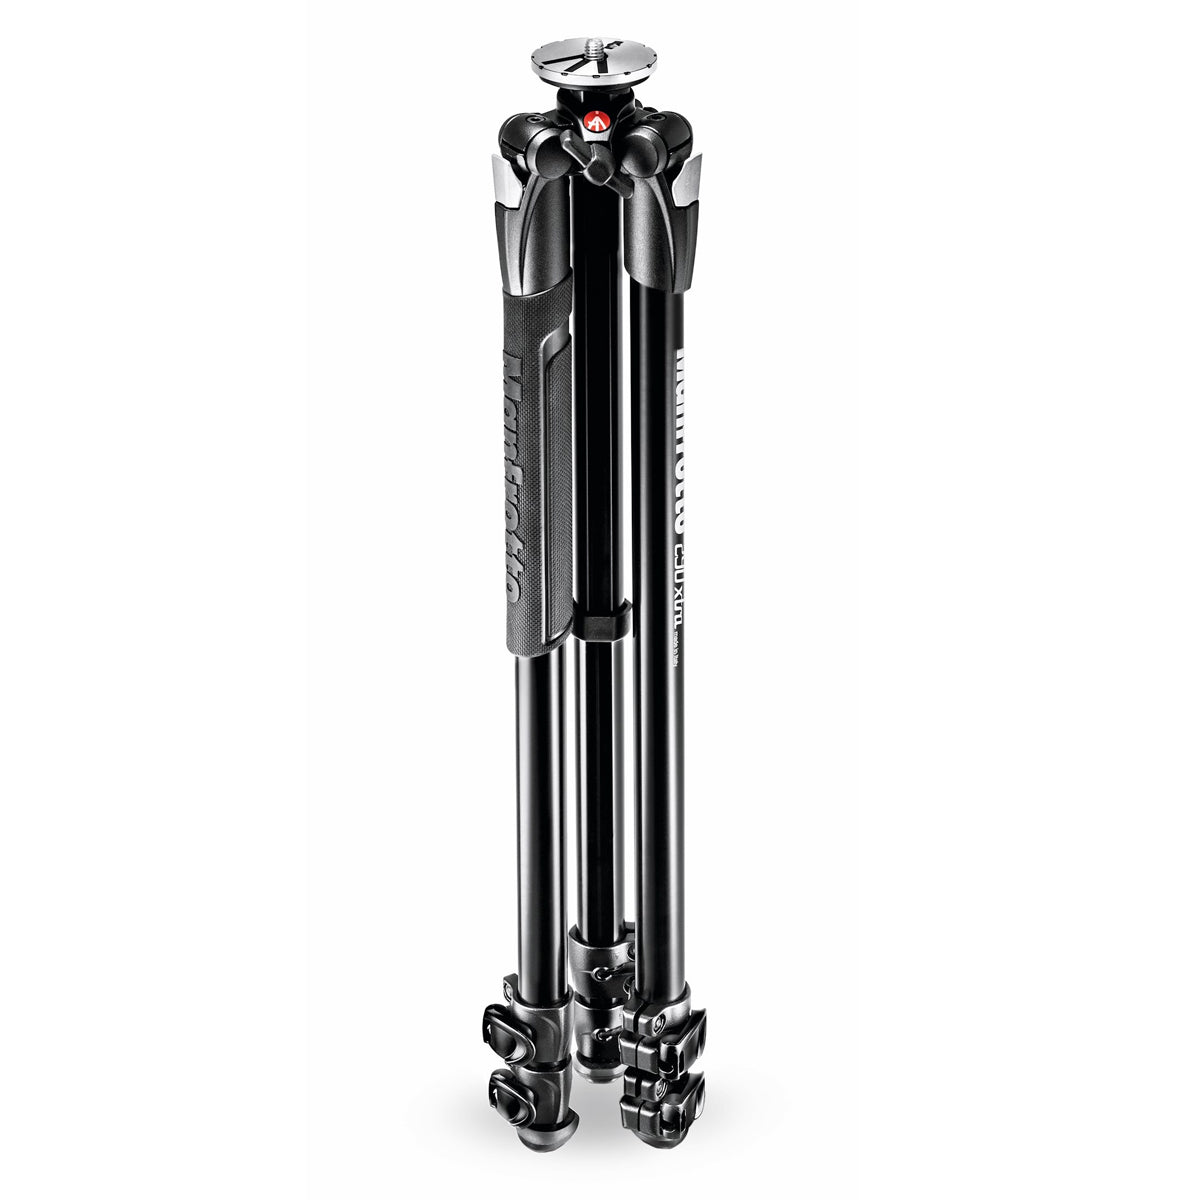 Manfrotto 290 XTRA Aluminum Tripod by Manfrotto | Optics - goHUNT Shop